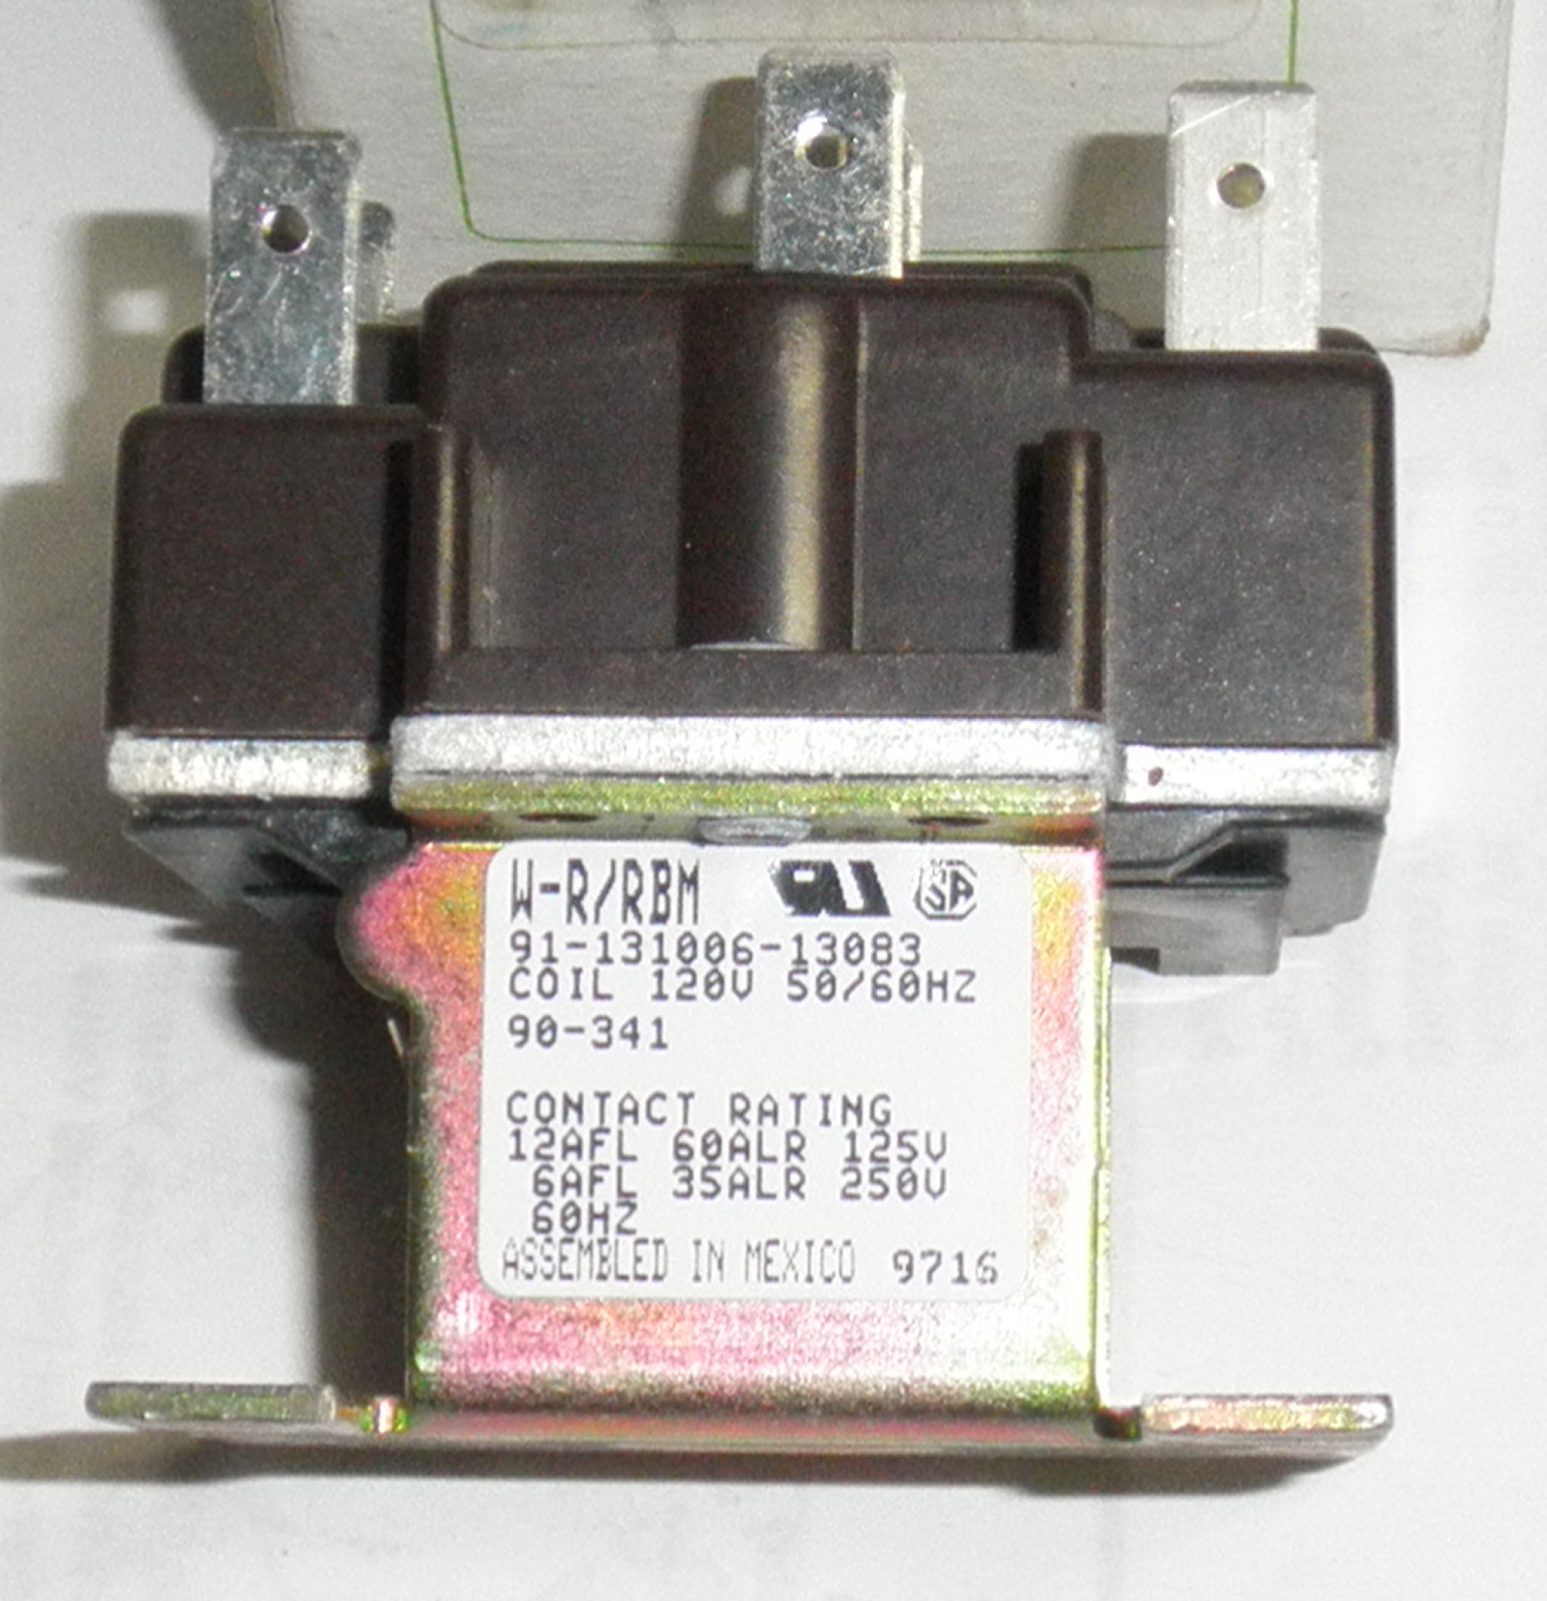 Steveco 90-341 RBM Type 91 Relay 12a 125vac for sale online 